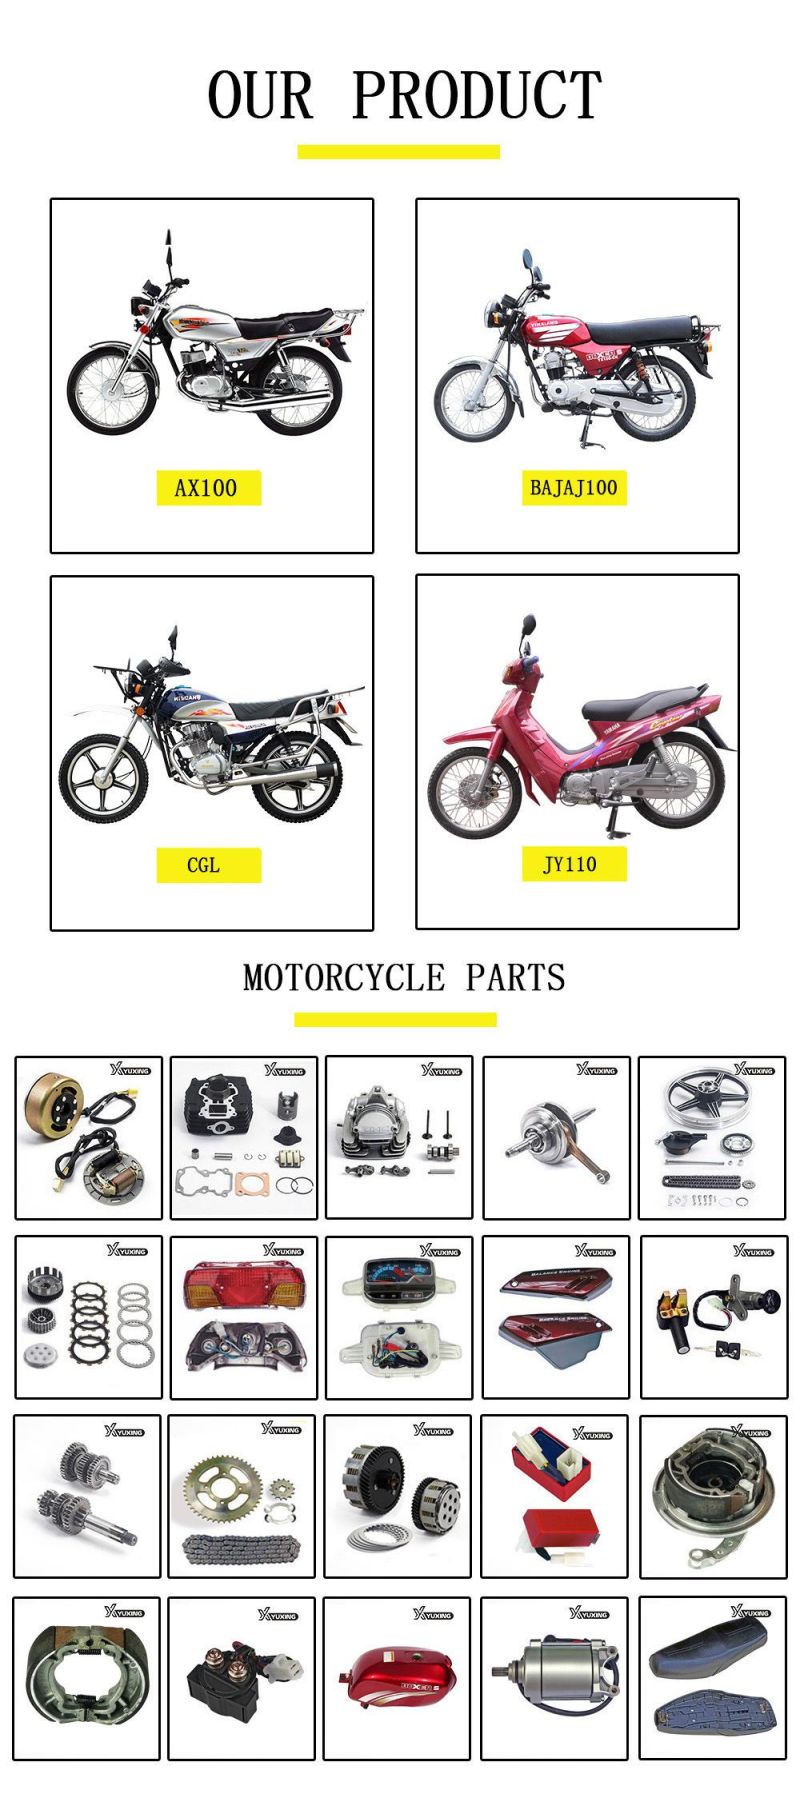 Motorcycle Chain and Sprocket Motorcycle Engine Motorcycle Spare Parts